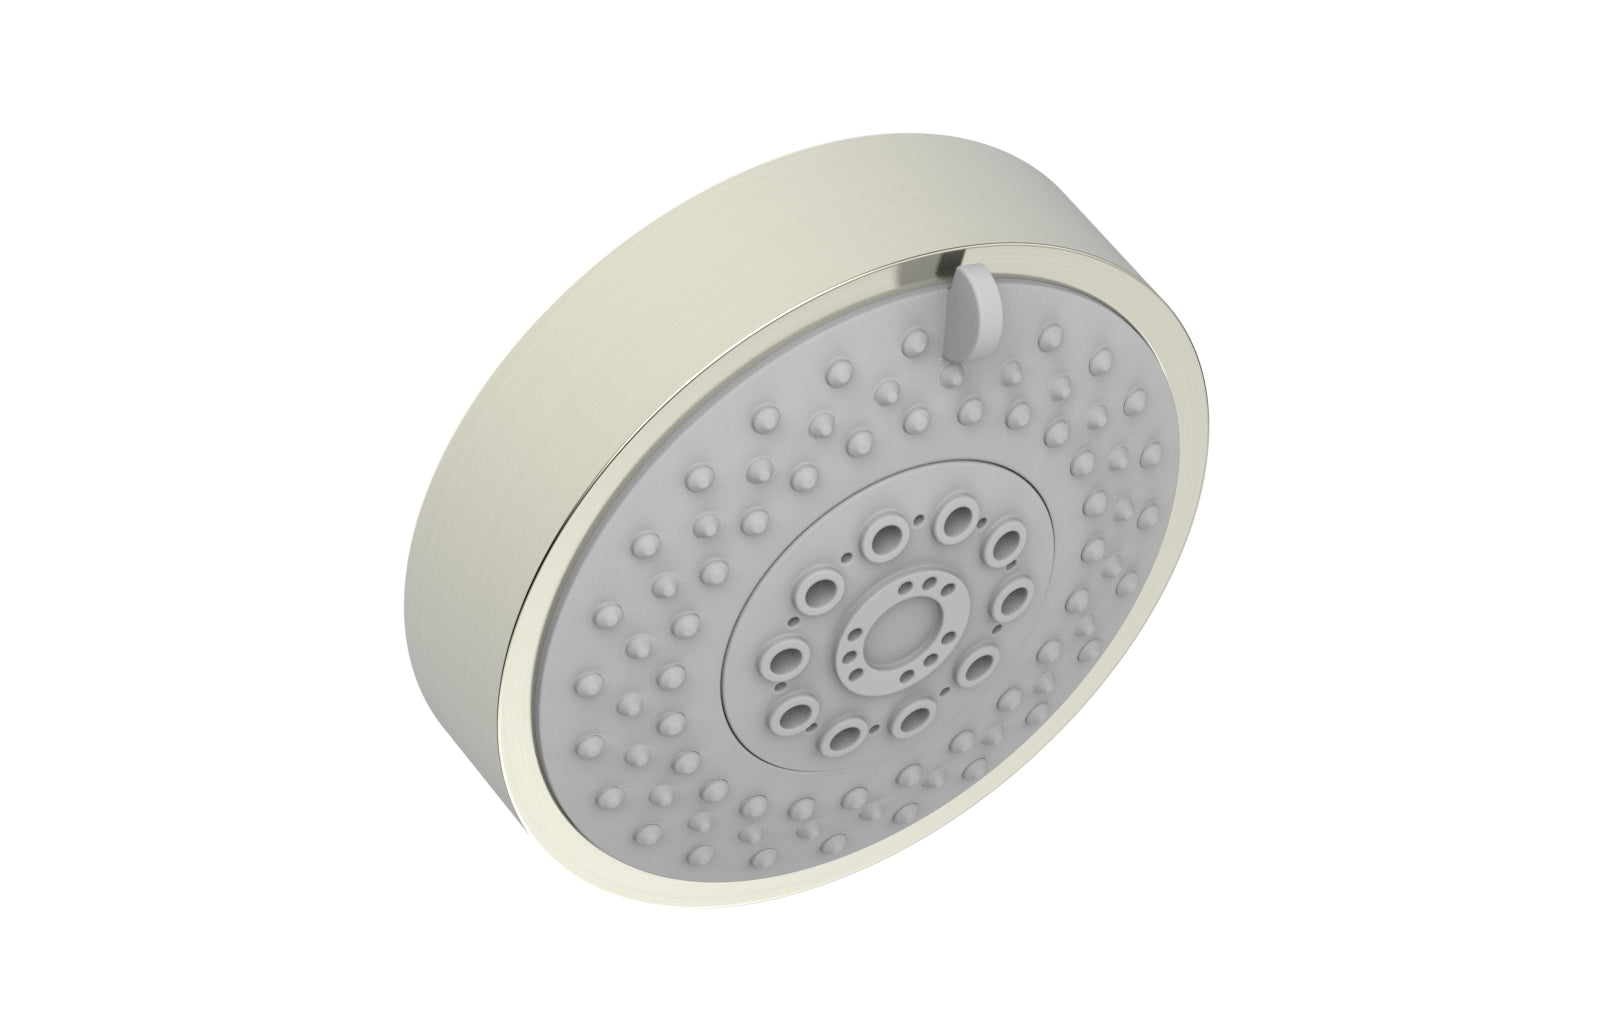 Phylrich Contemporary 3-Function Shower Head